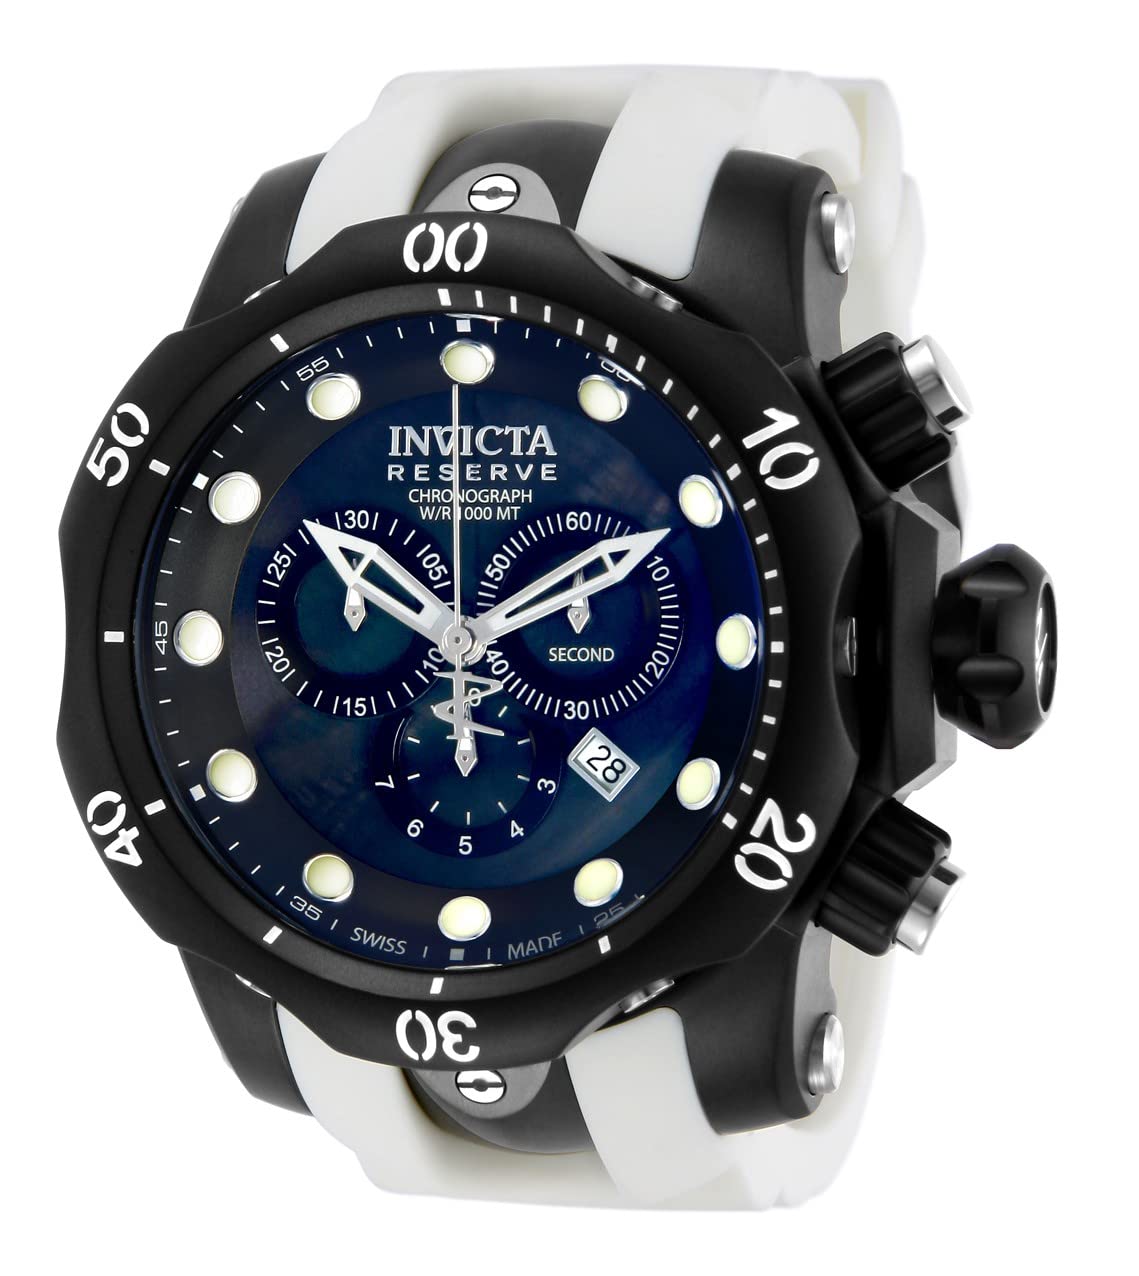 Invicta Band ONLY Reserve 11156